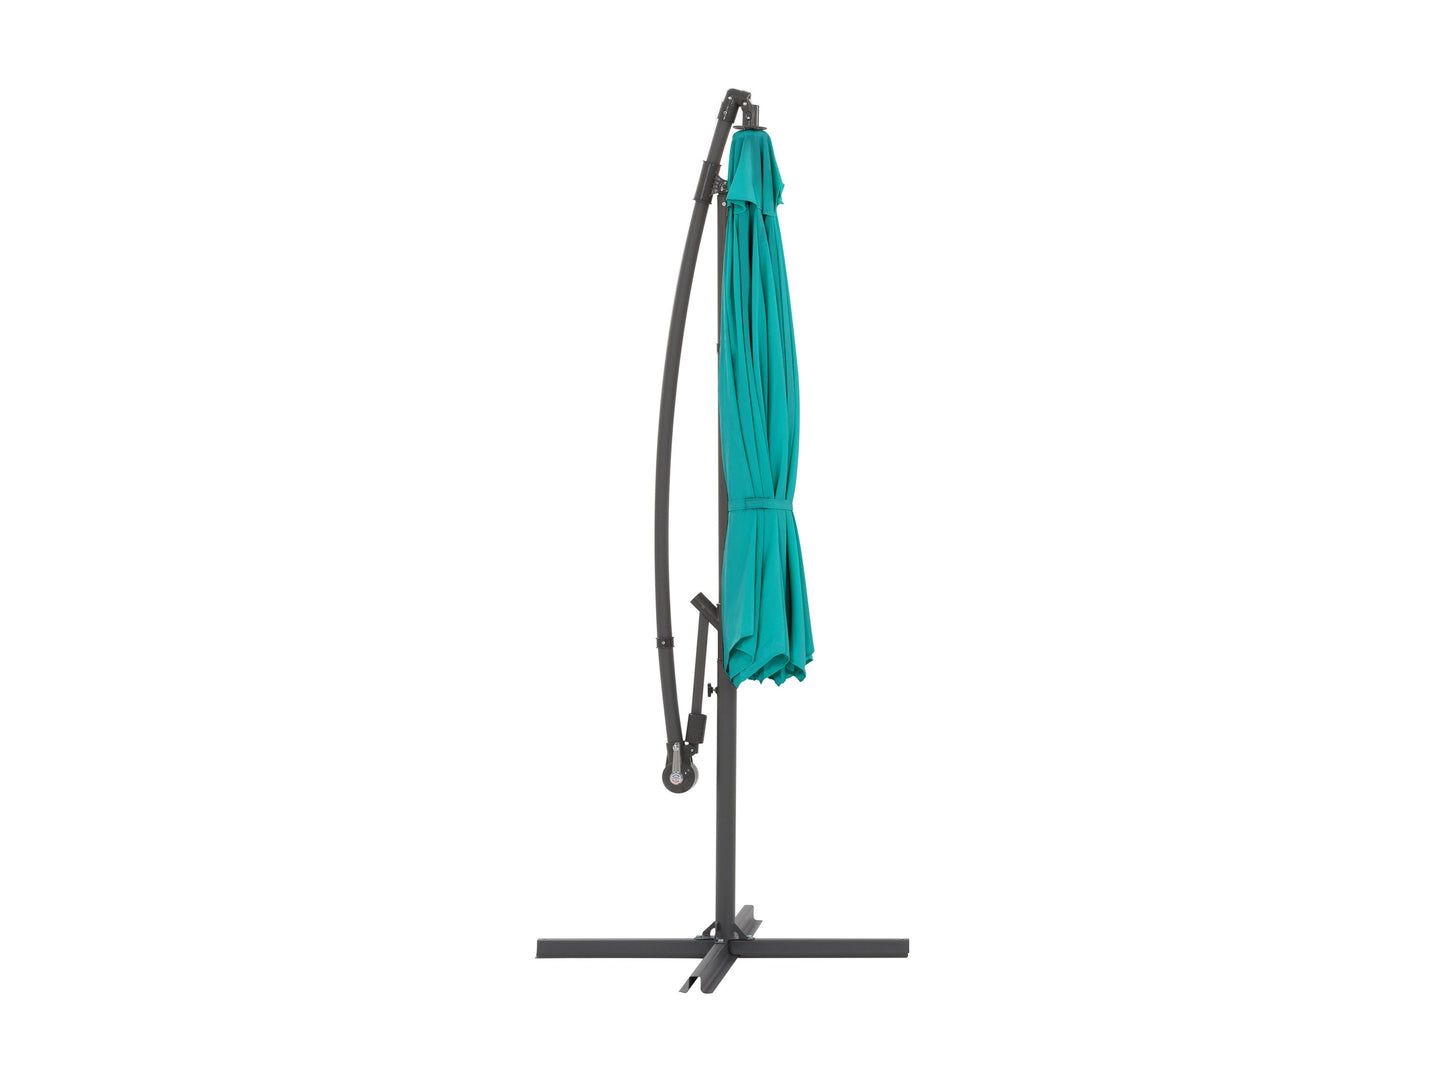 turquoise blue offset patio umbrella 400 Series product image CorLiving#color_turquoise-blue